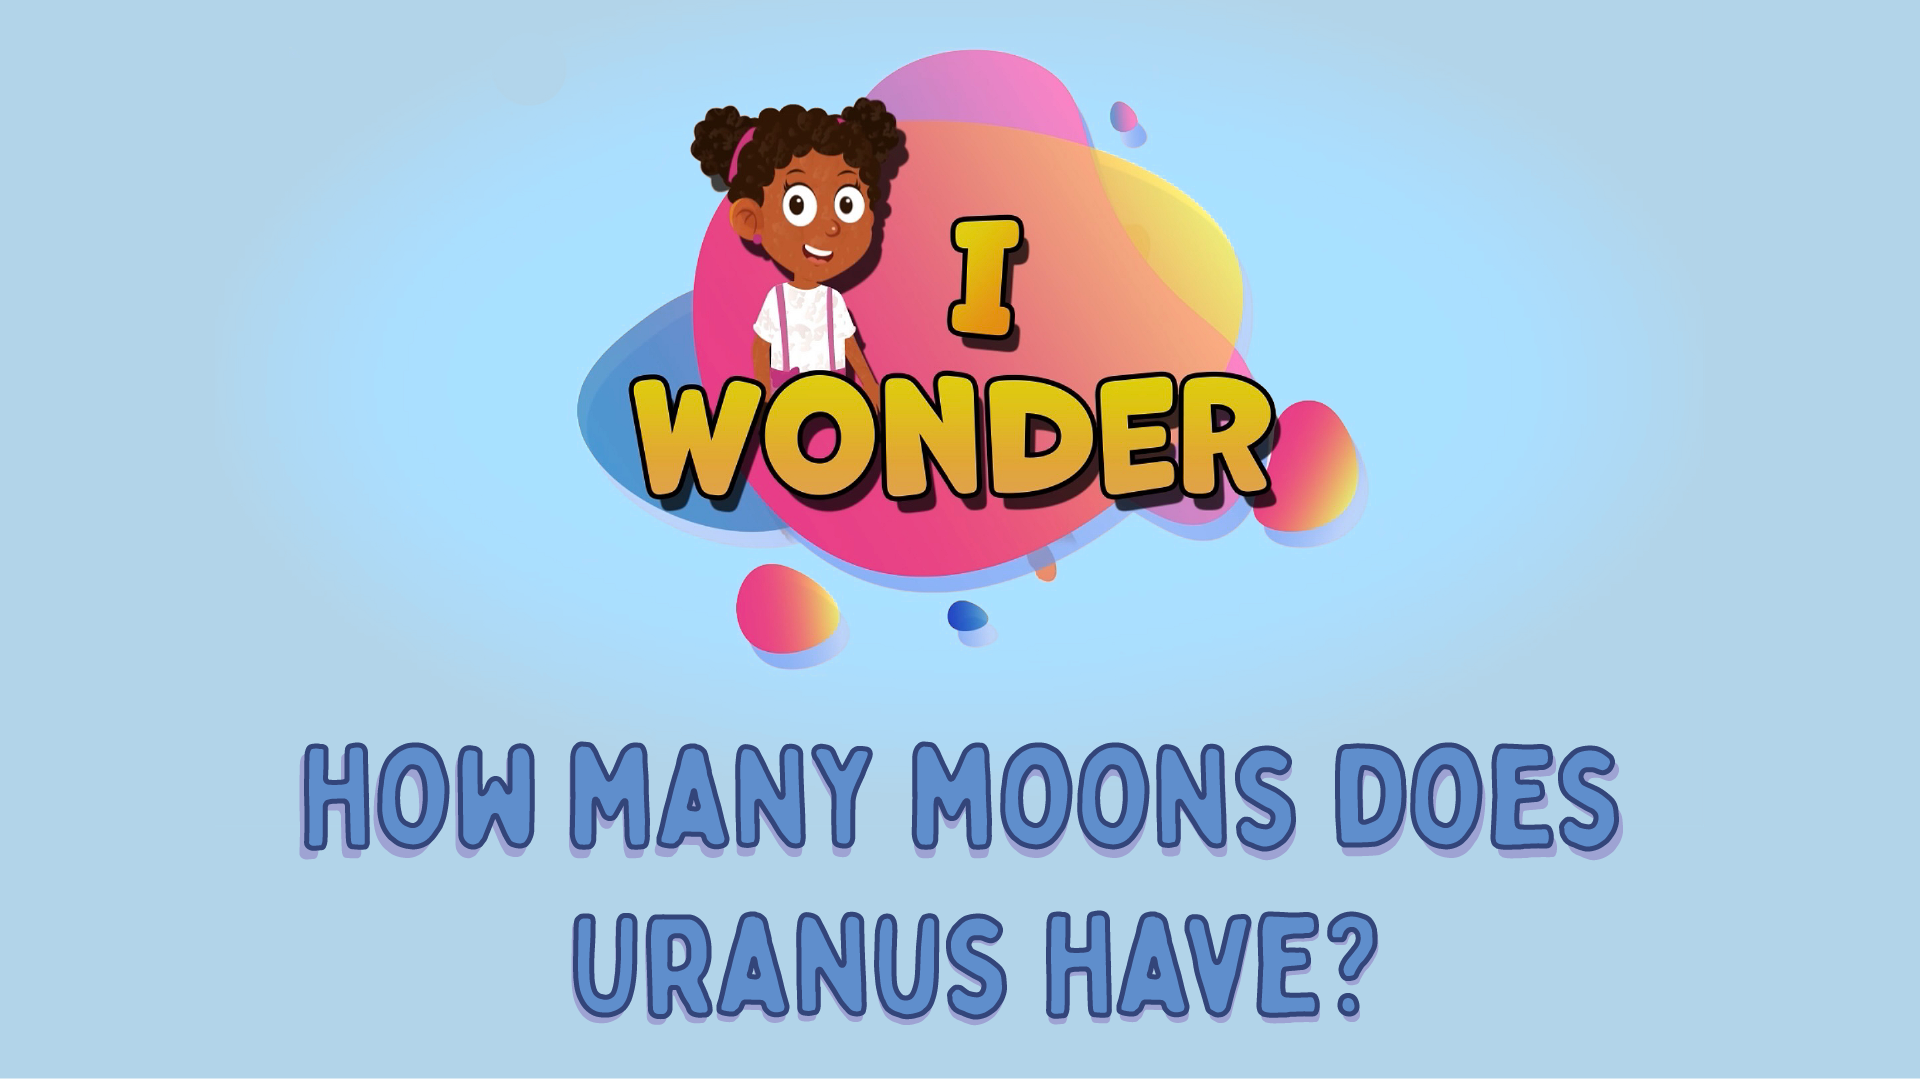 How Many Moons Does Uranus Have?